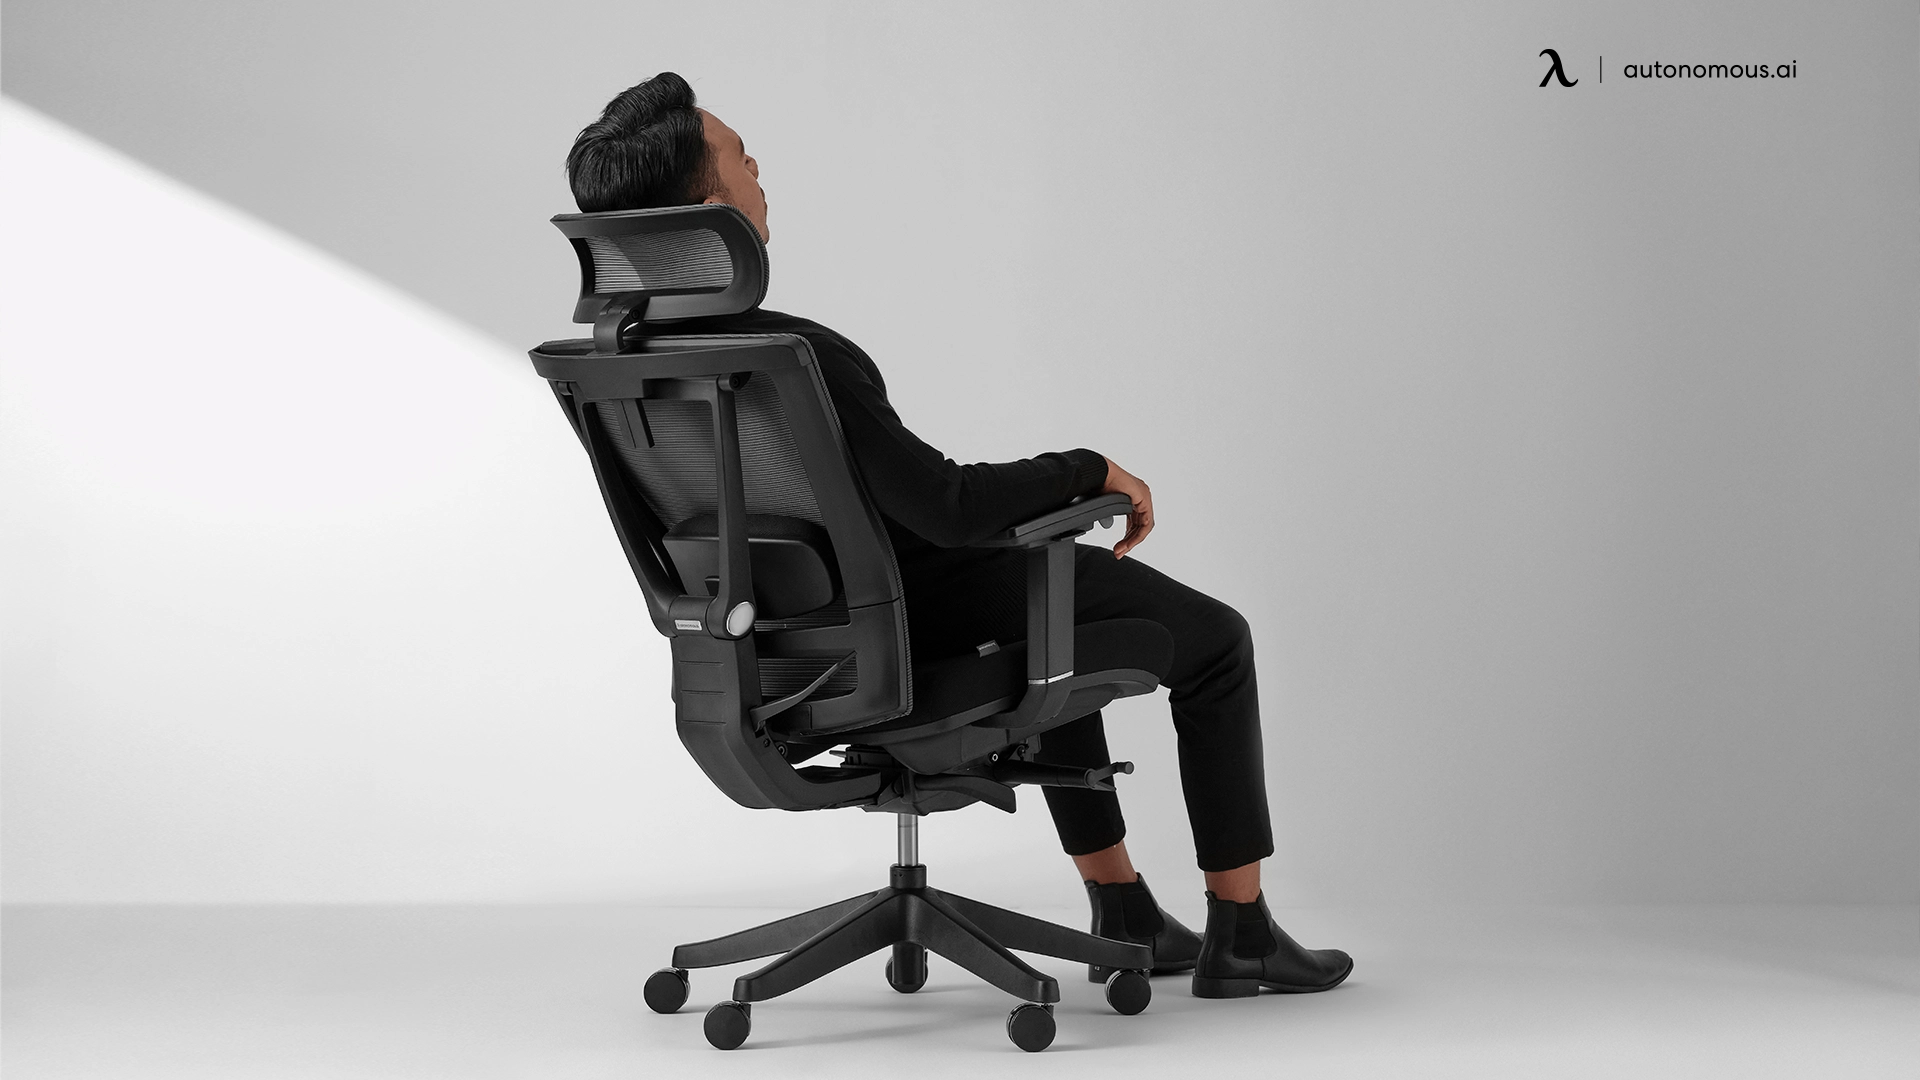 Best Office Chair for Long Hours – Top Picks for Ultimate Comfort